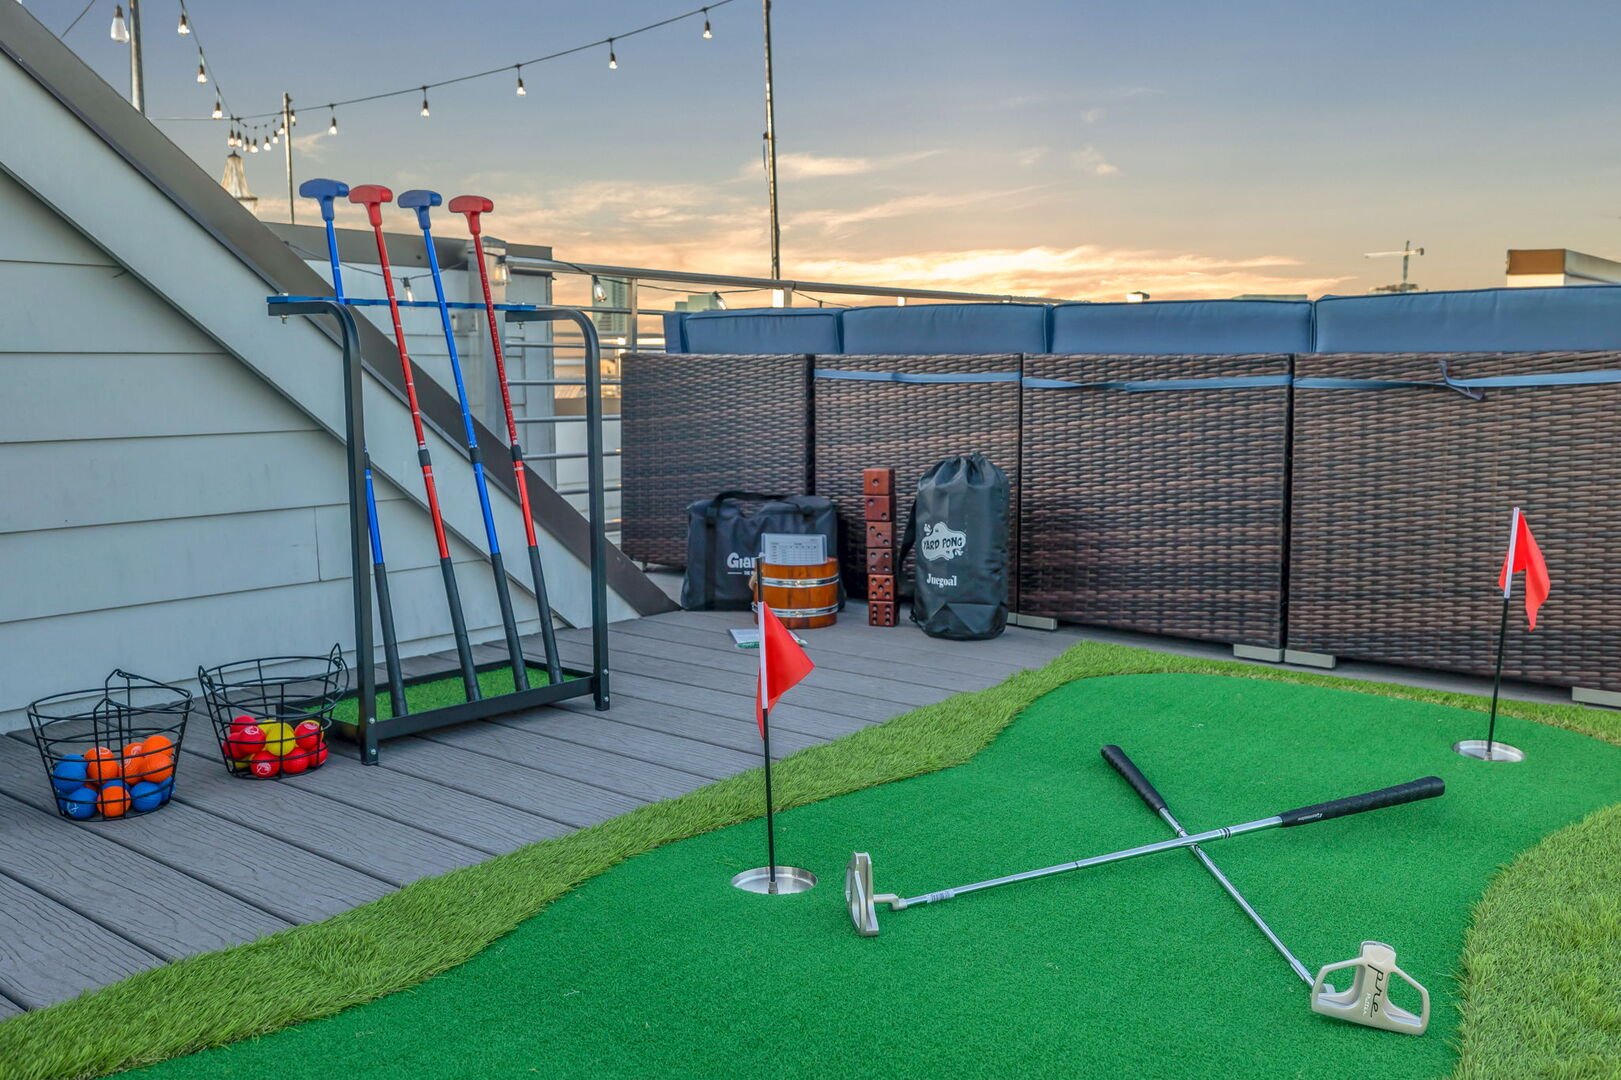 Private 600-square-foot outdoor deck and 360-degree views of Downtown Nashville with outdoor games, BBQ, cooler, plus outdoor seating.